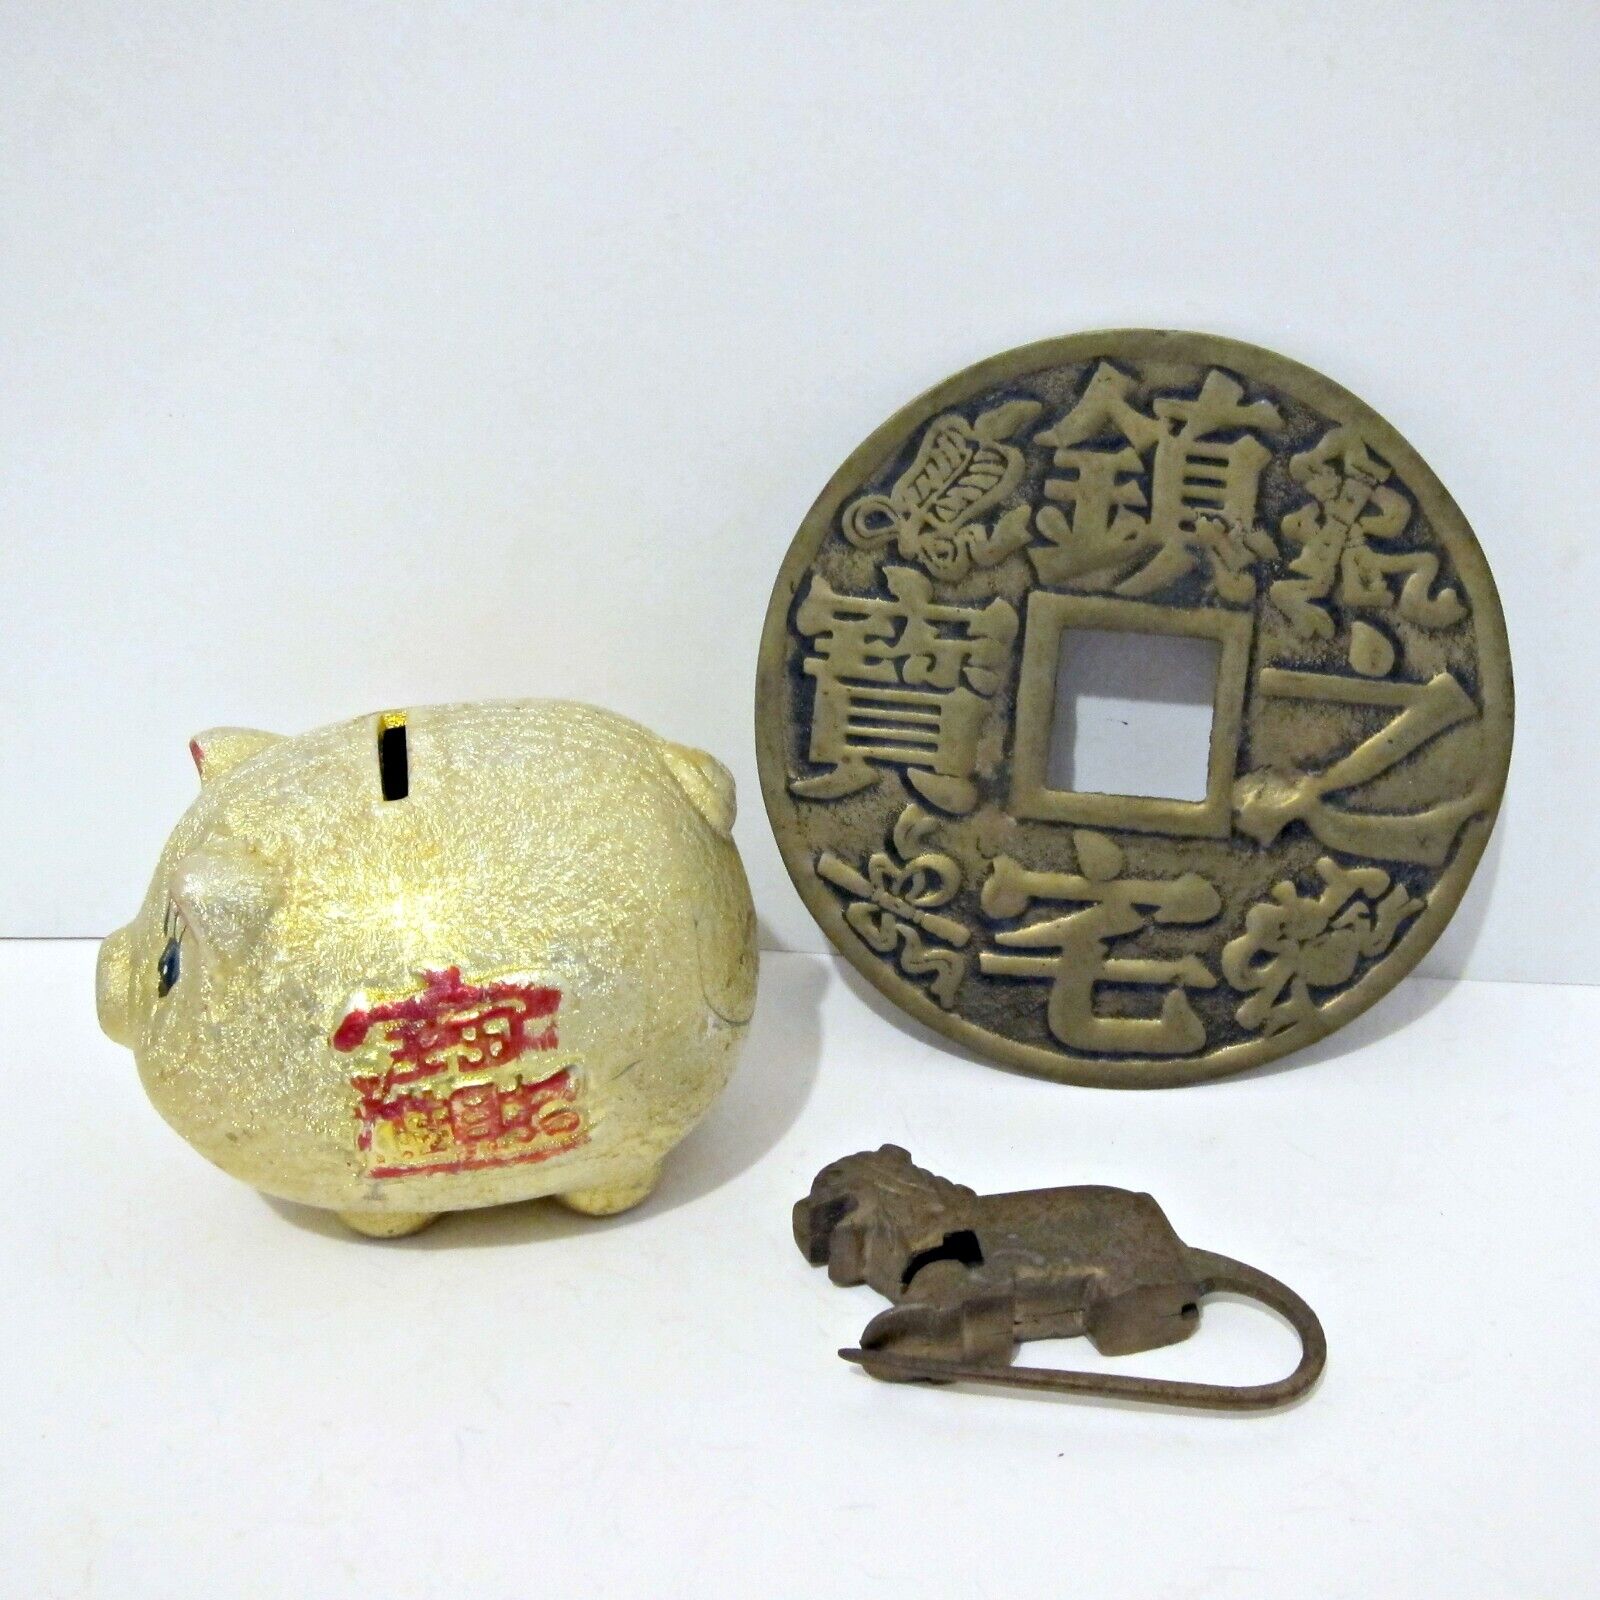 VINTAGE CHINESE COLLECTIBLES LOT - Fu Dog Lock - Piggy Bank - Large Cash Coin